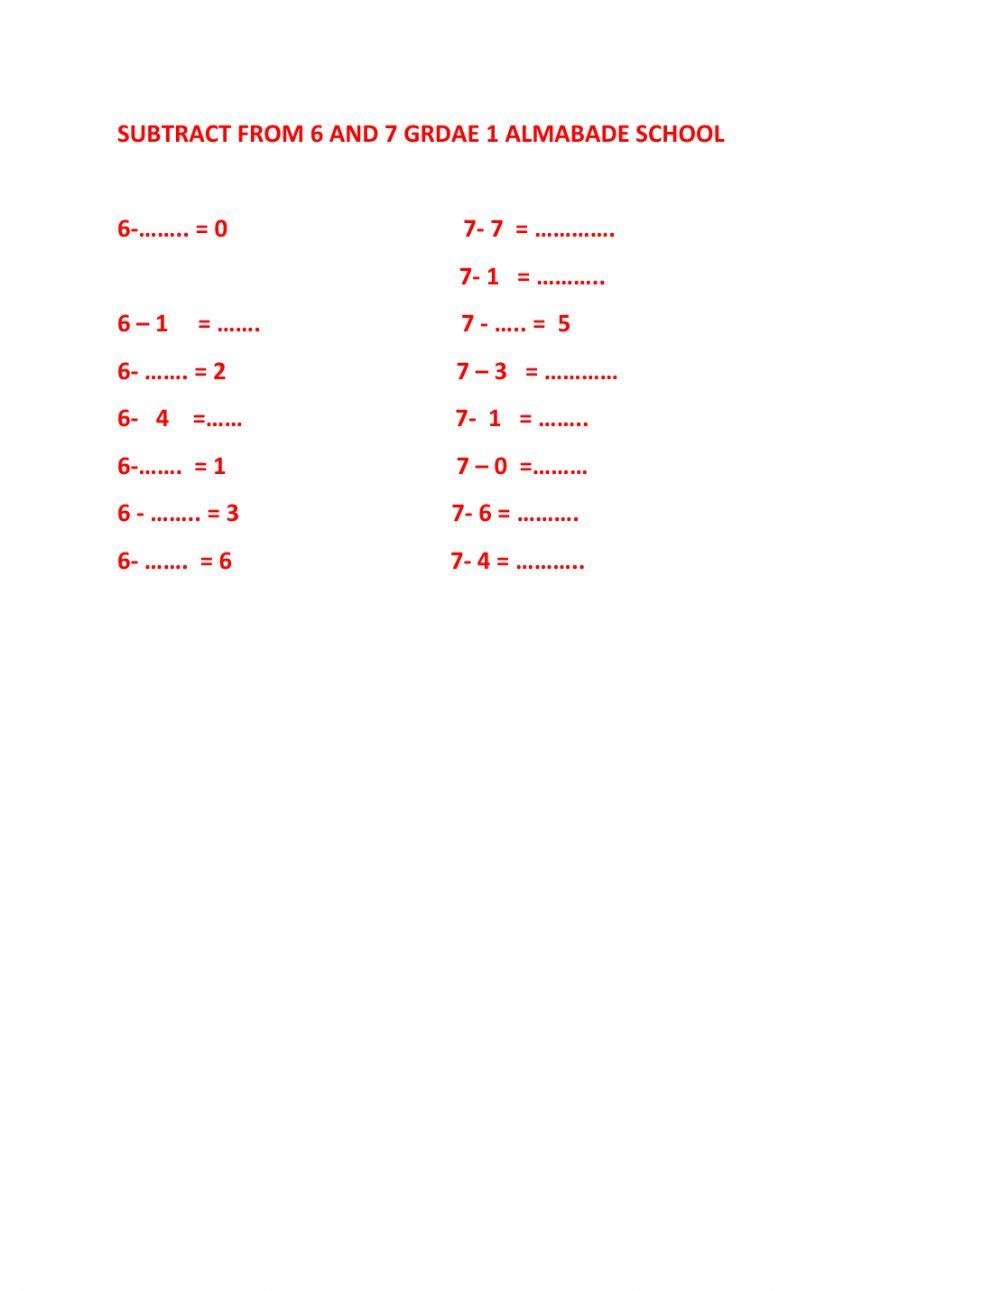 Worksheet for subtract from 6 nad 7